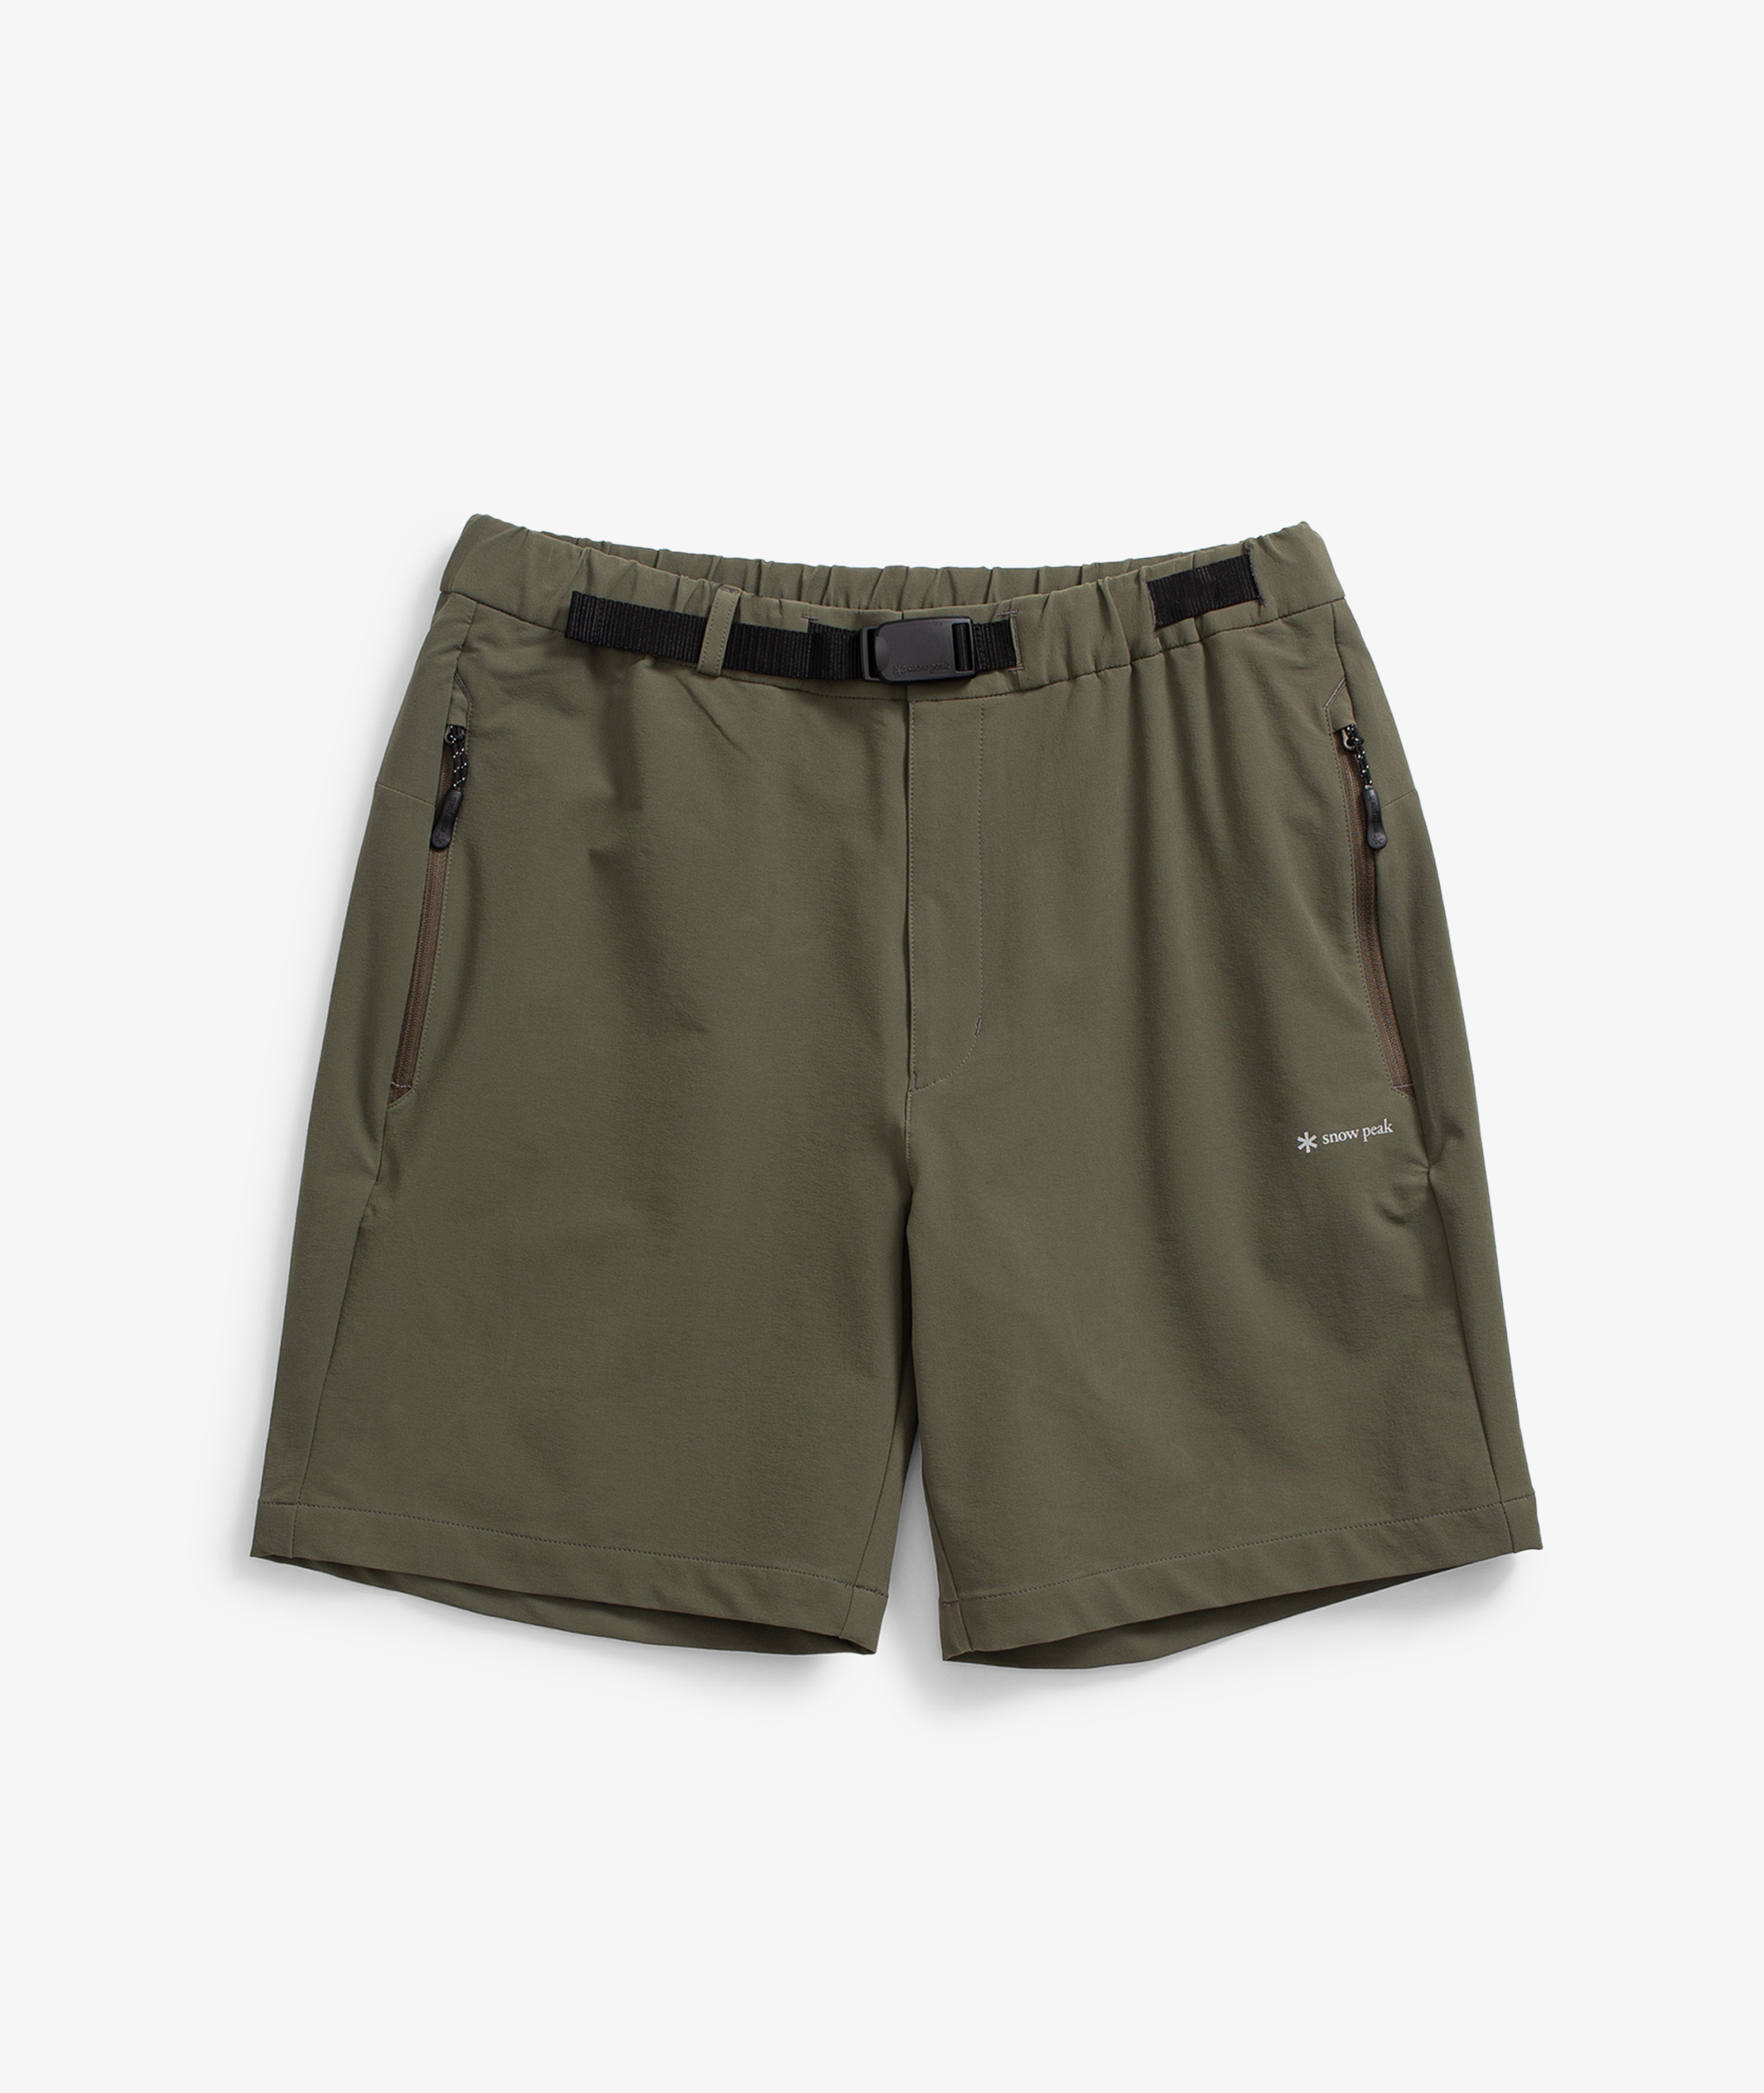 Norse Store | Shipping Worldwide - Snow Peak DWR Comfort Shorts